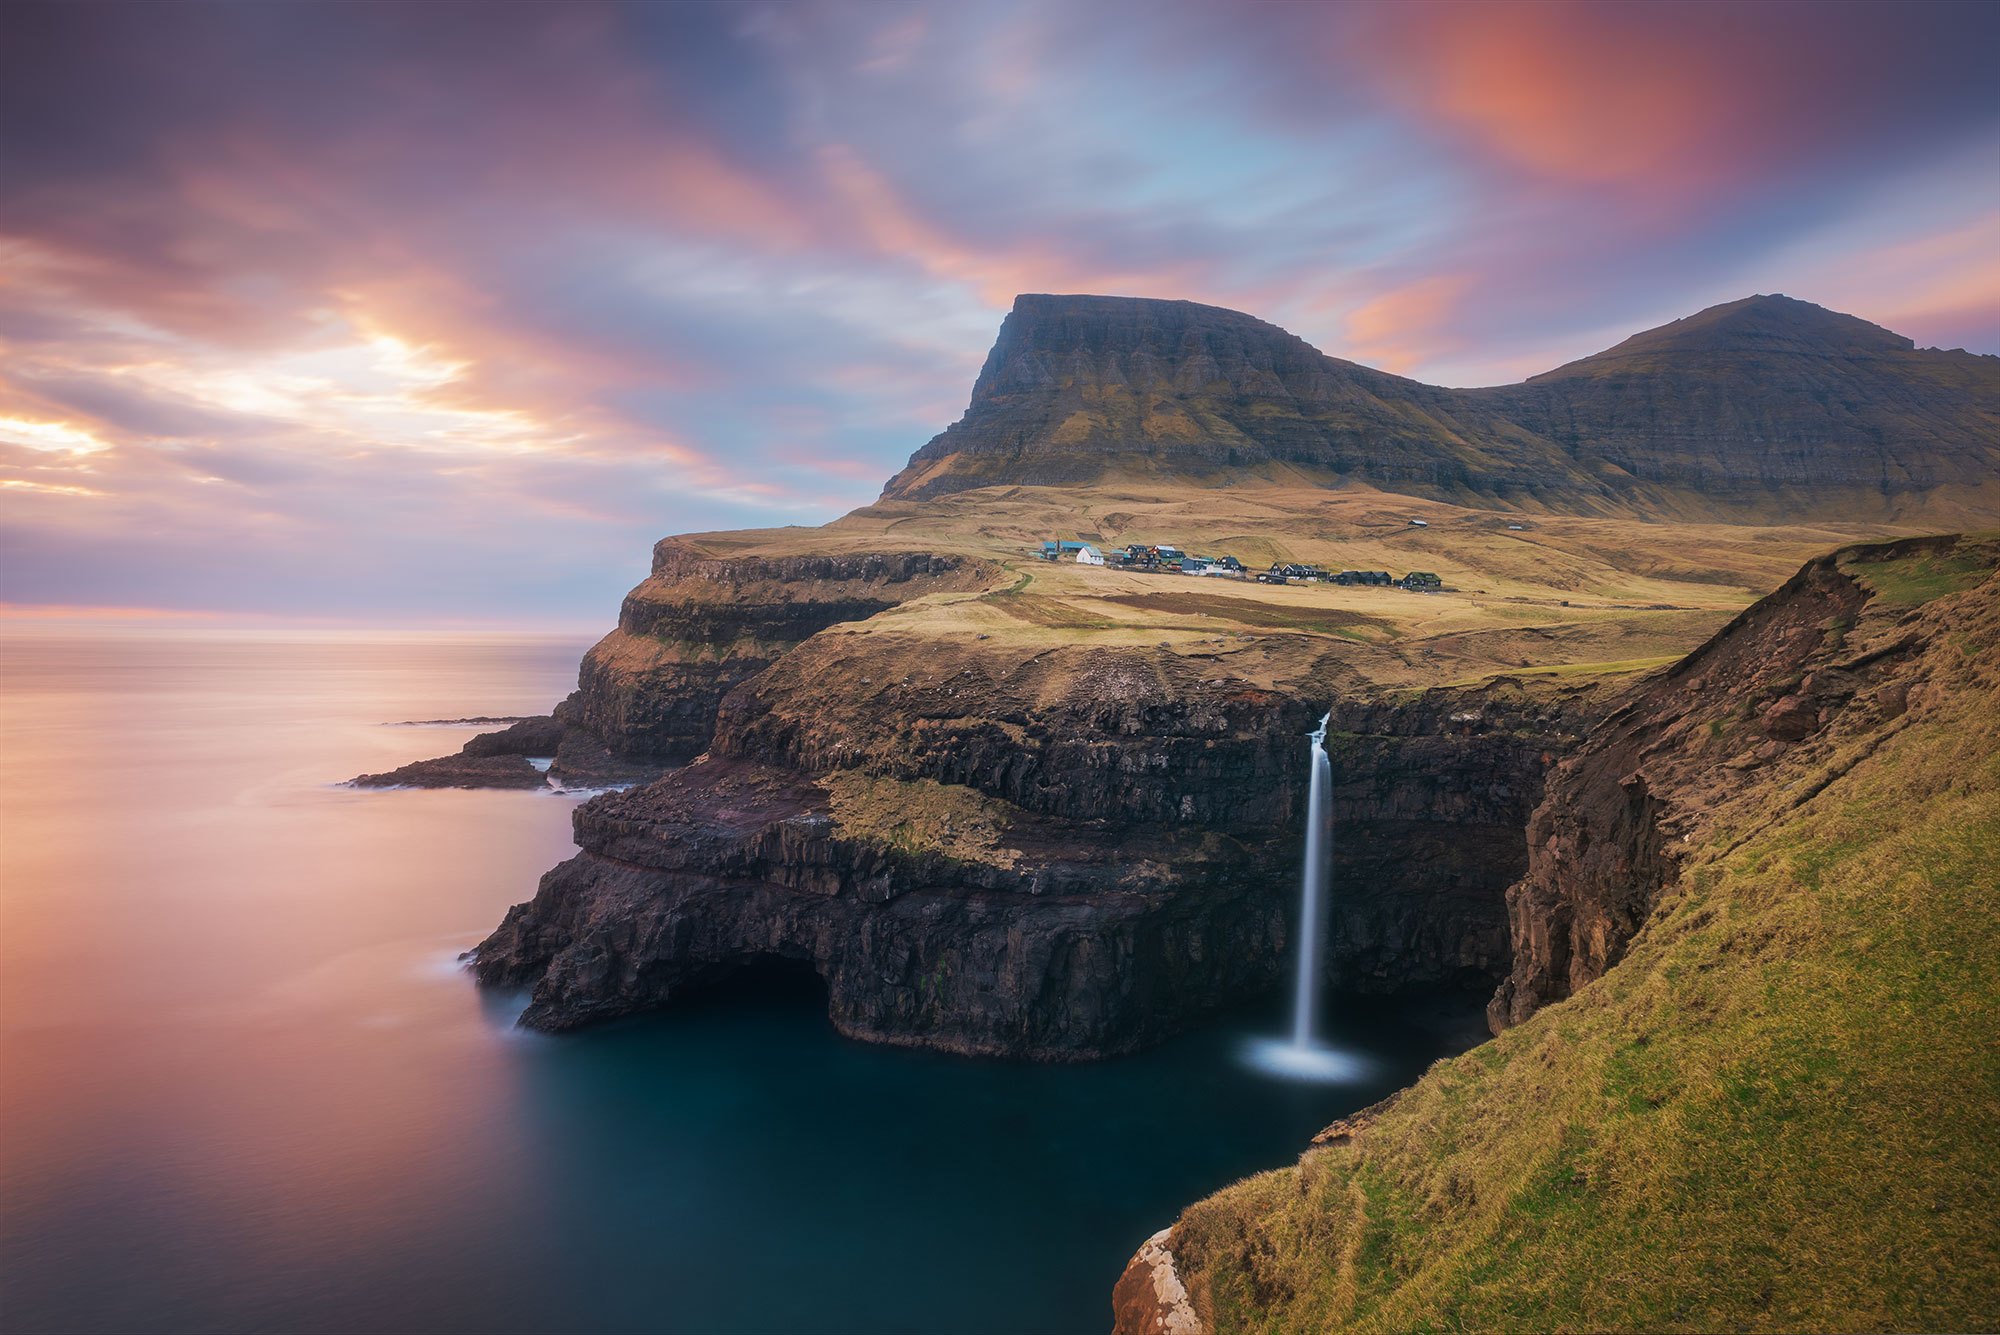 Indulge in the captivating artistry of landscape photography with this mesmerizing image capturing the sunset over the picturesque village of Gásadalur and the iconic Múlafossur waterfall in the Faroe Islands. Immortalized by landscape photographer Jennifer Esseiva, this stunning composition encapsulates the serene beauty of nature's spectacle. Let yourself be transported to this remote paradise as you admire the interplay of light and shadow against the rugged cliffs and cascading waters.